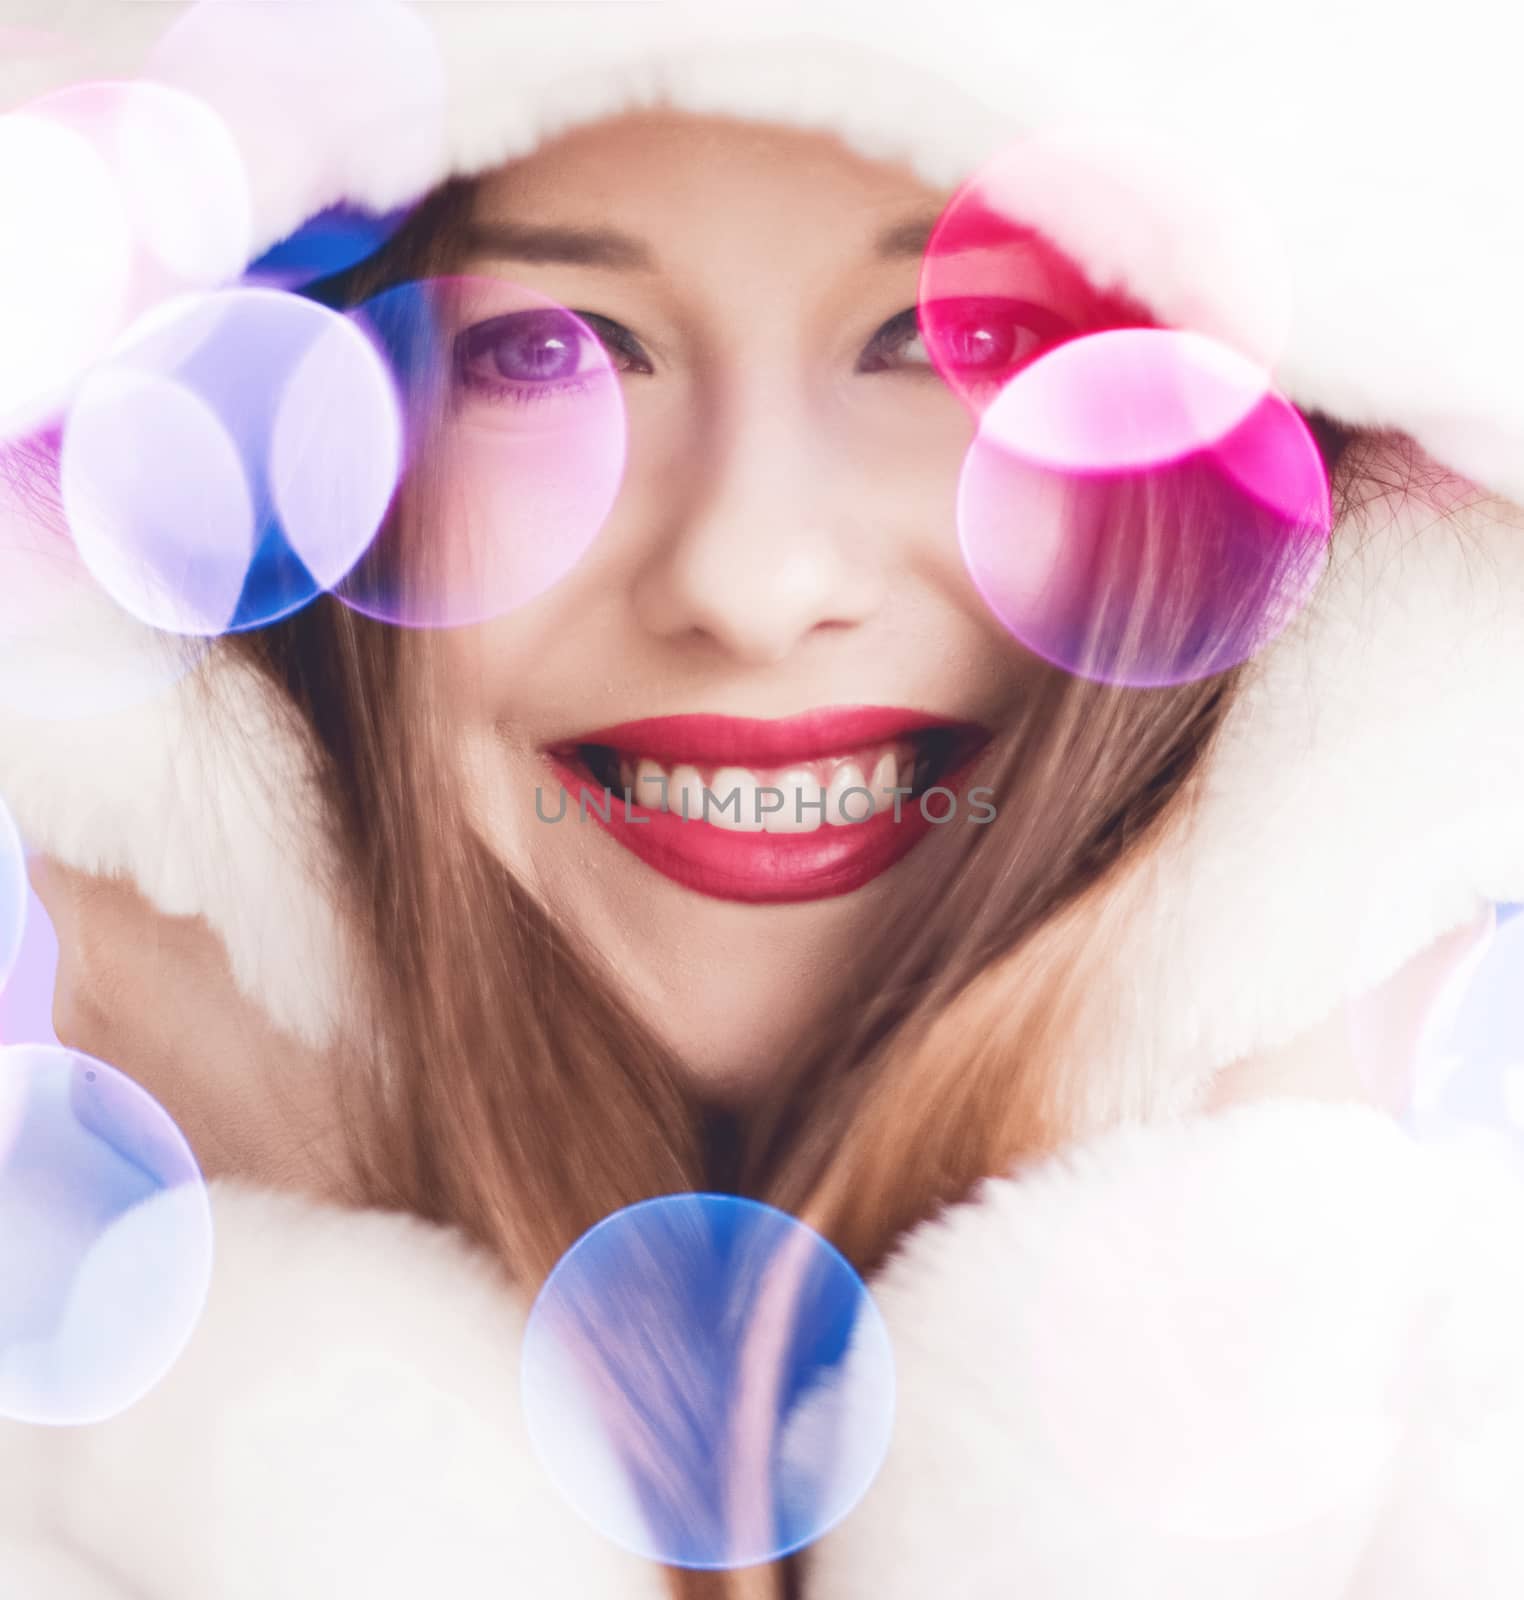 Merry Christmas portrait of smiling young woman wearing fluffy w by Anneleven